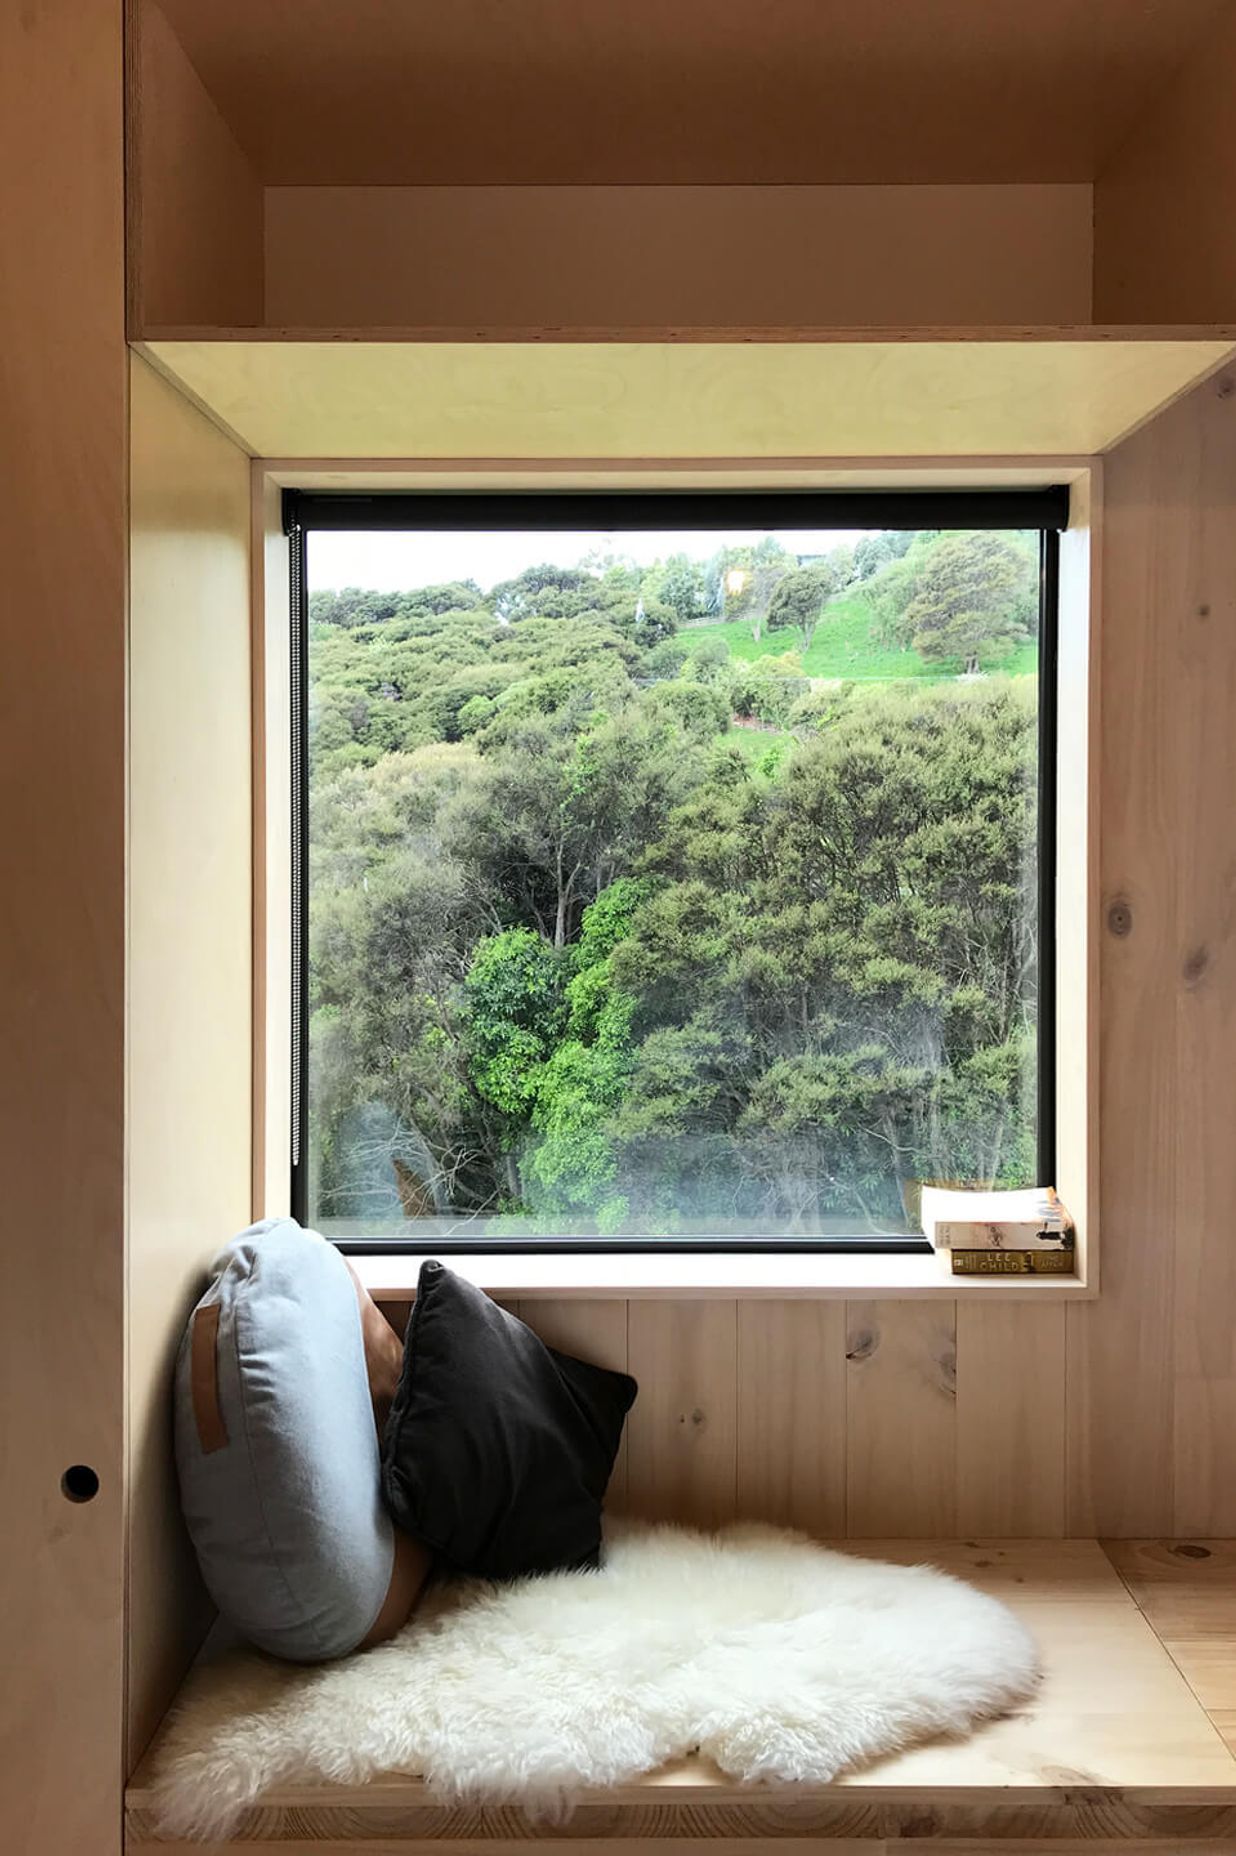 A built-in window seat looks out to a manuka bush-clad hillside and grazing farm animals.